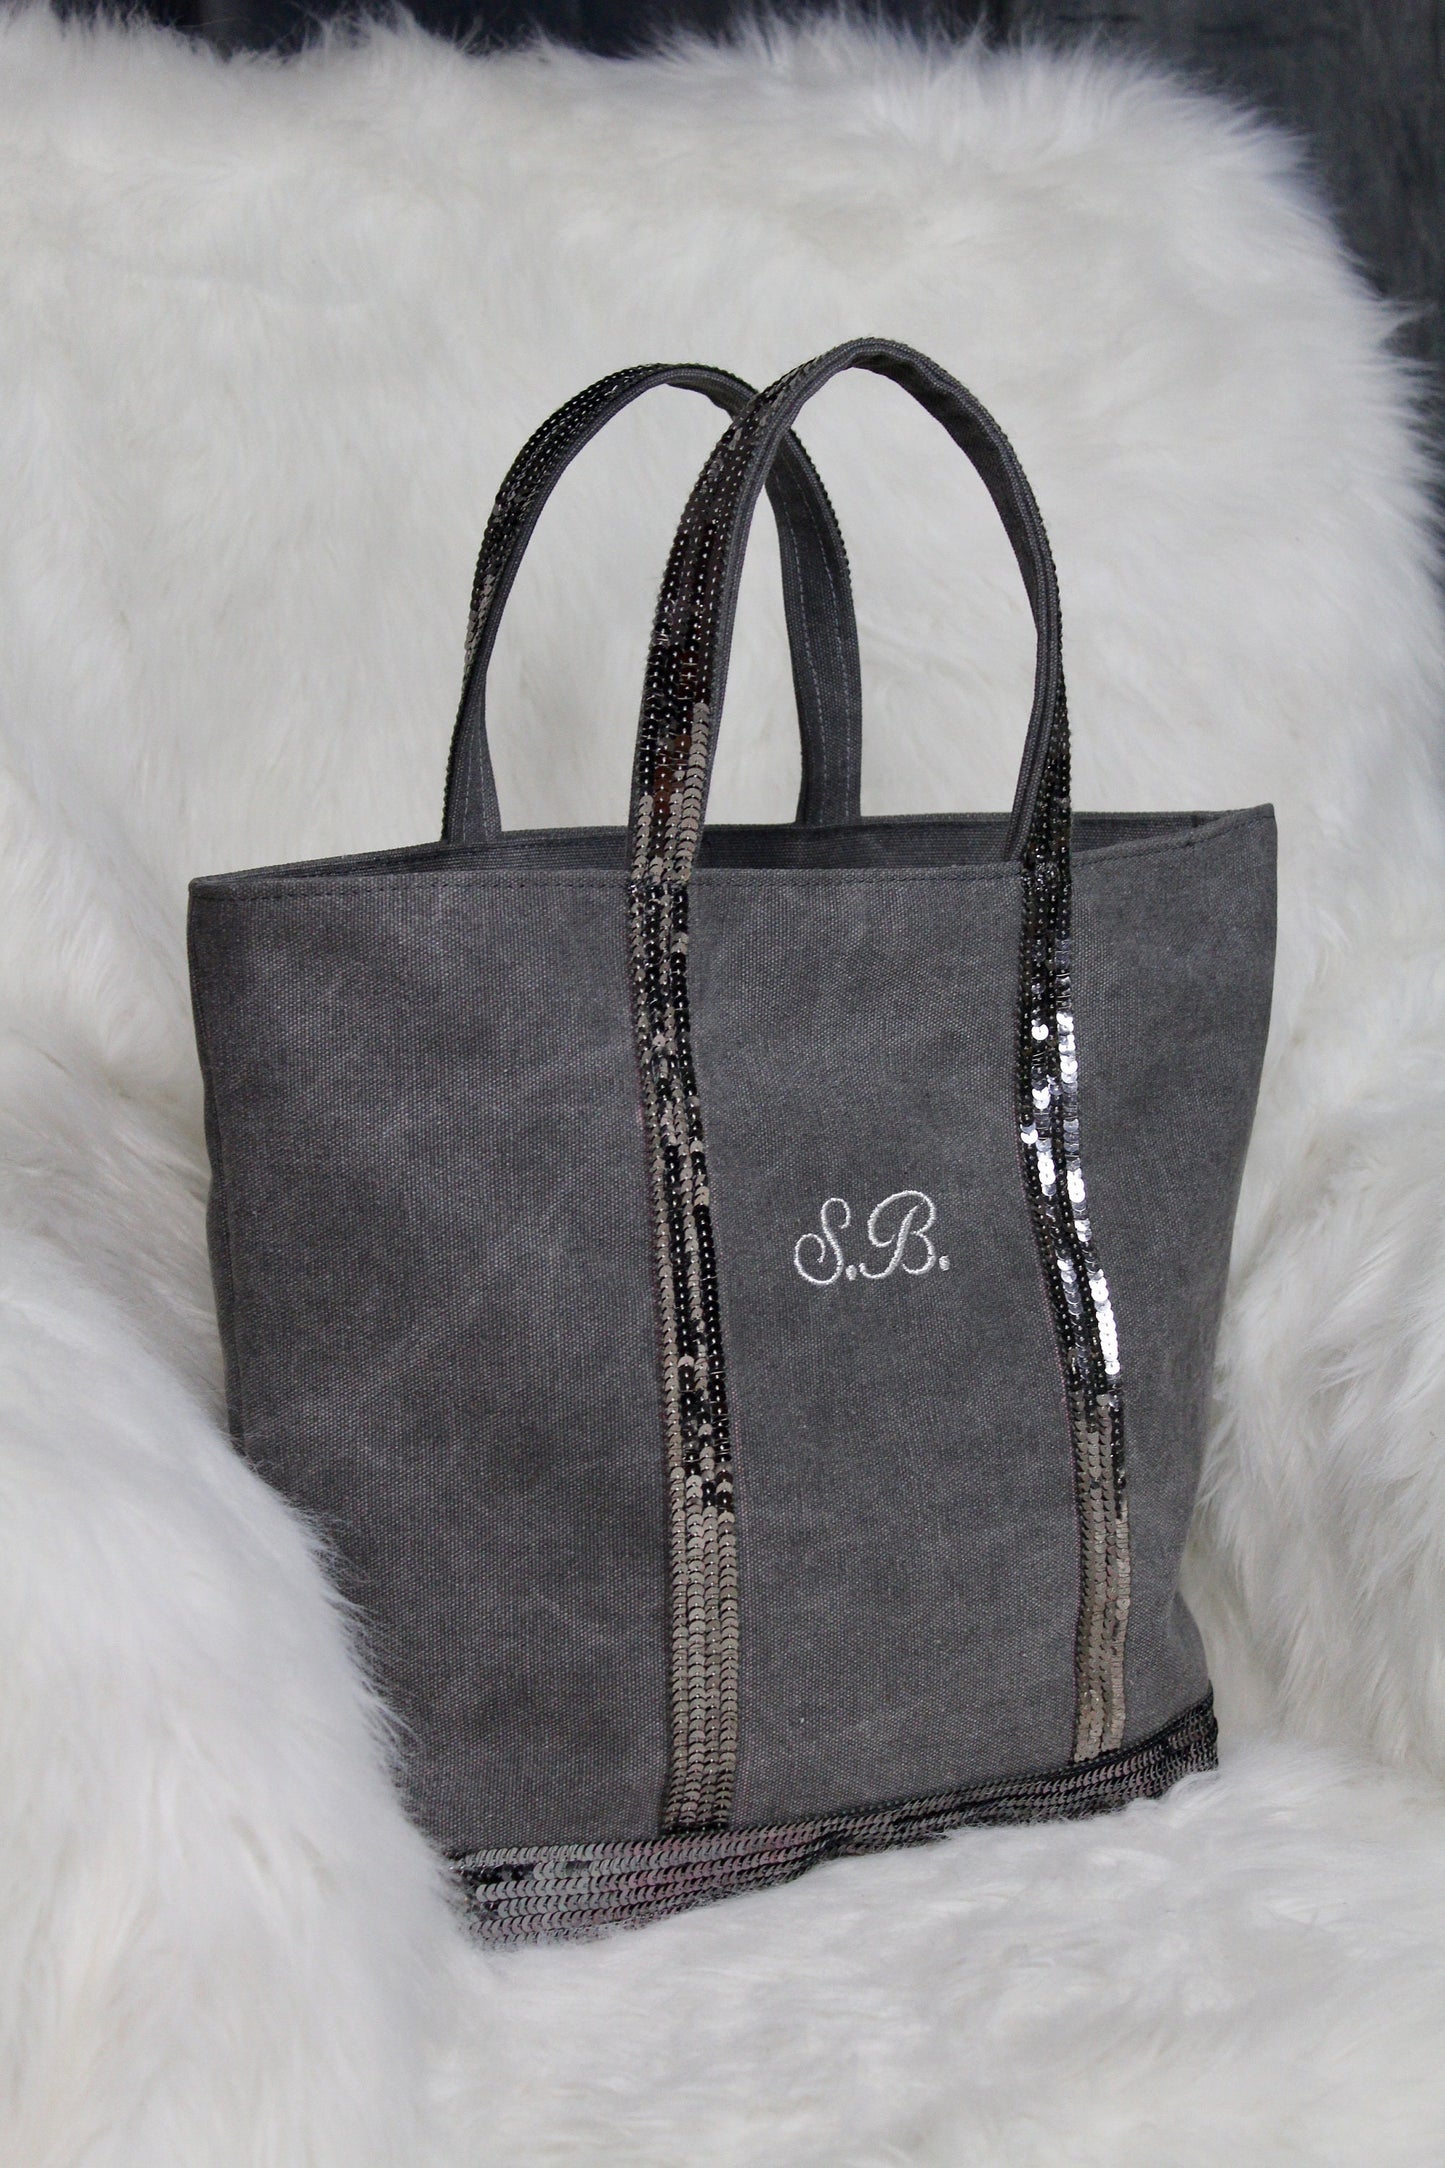 Gray tote bag with embroidered initials - corporate gift tote bag - gray tote bag with logo